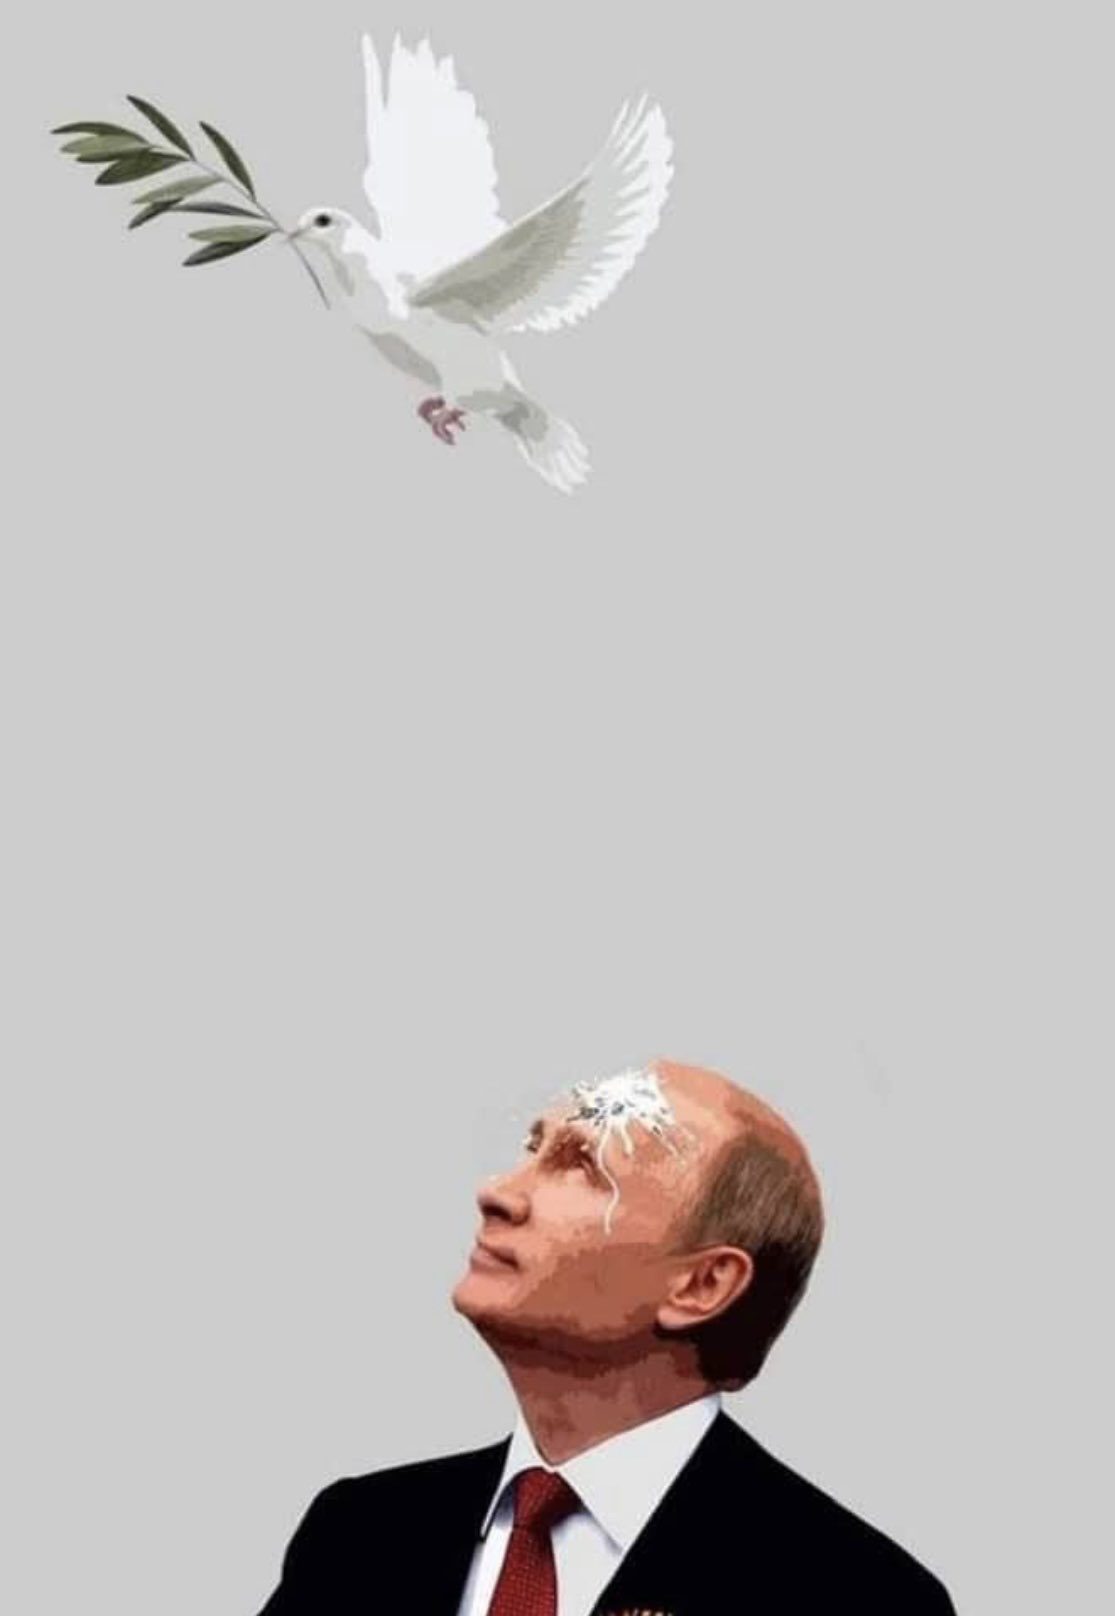 Vladimir Putin gets pooped on by dove